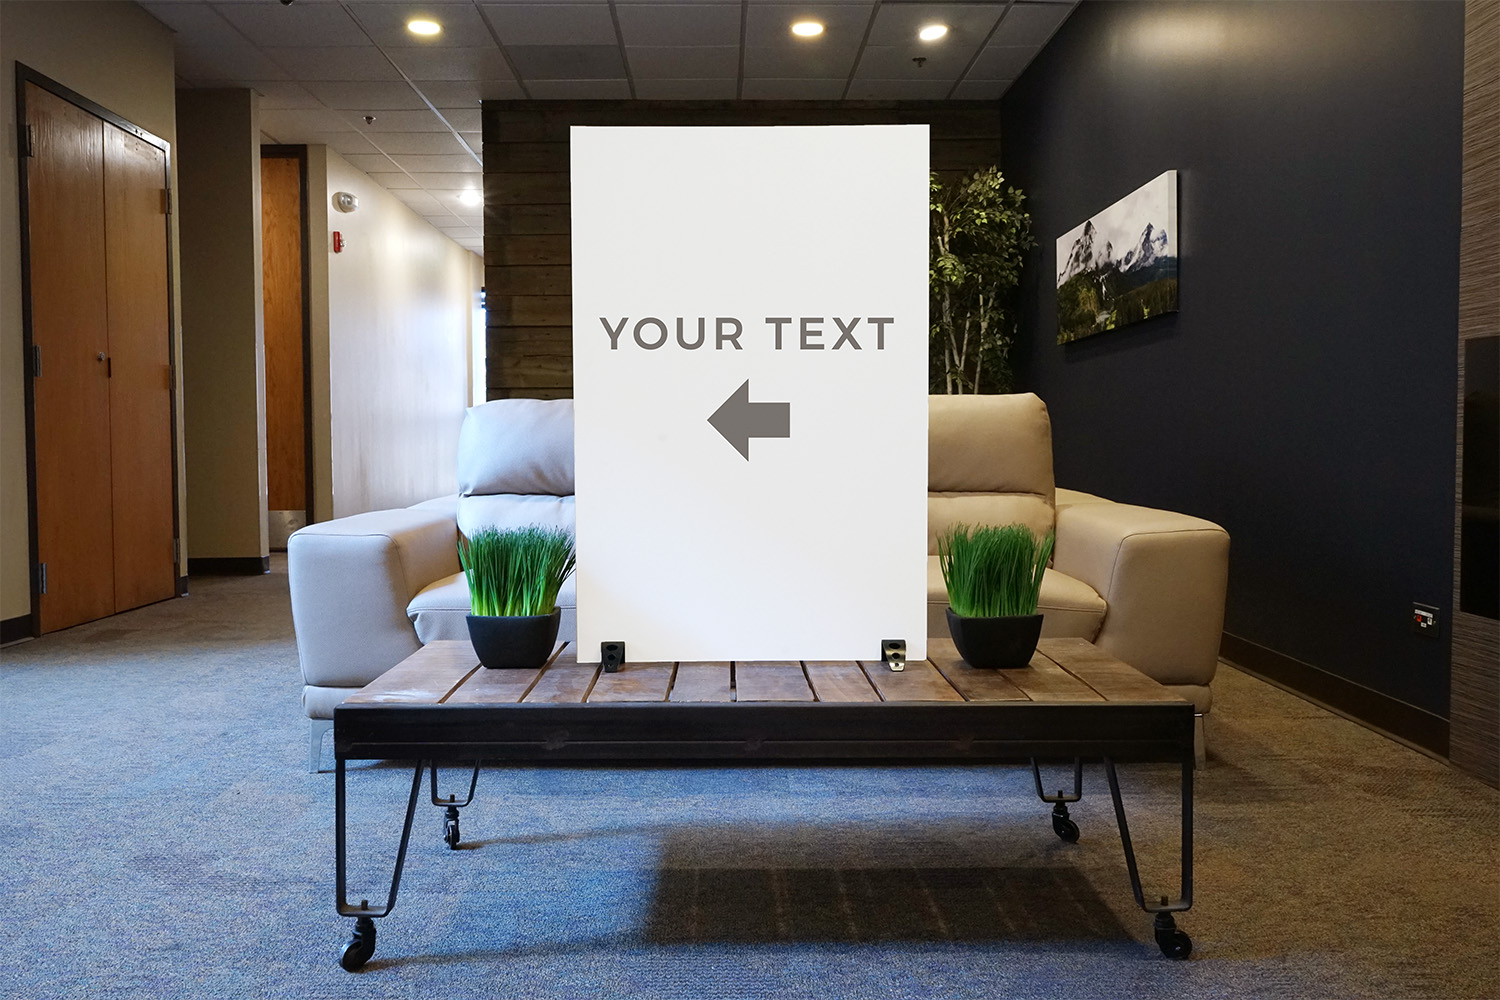 Rigid Signs, General Blue Your Text, 23 x 11.5 6